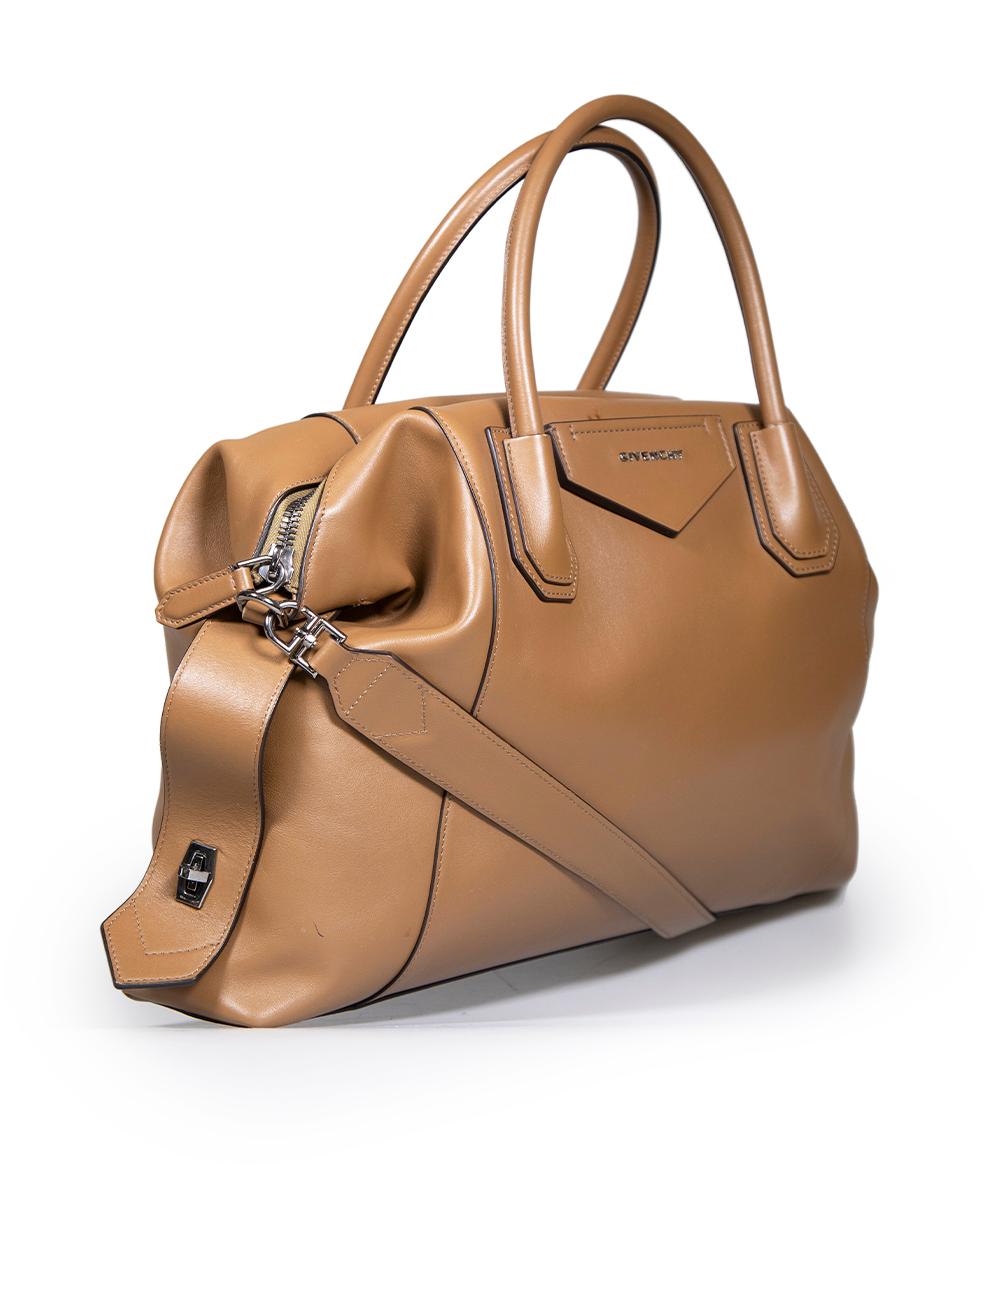 CONDITION is Very good. Minimal wear to bag is evident. Minimal wear to the front with small marks and there are abrasions to the leather at the base corners and on strap on this used Givenchy designer resale item. This item comes with original dust